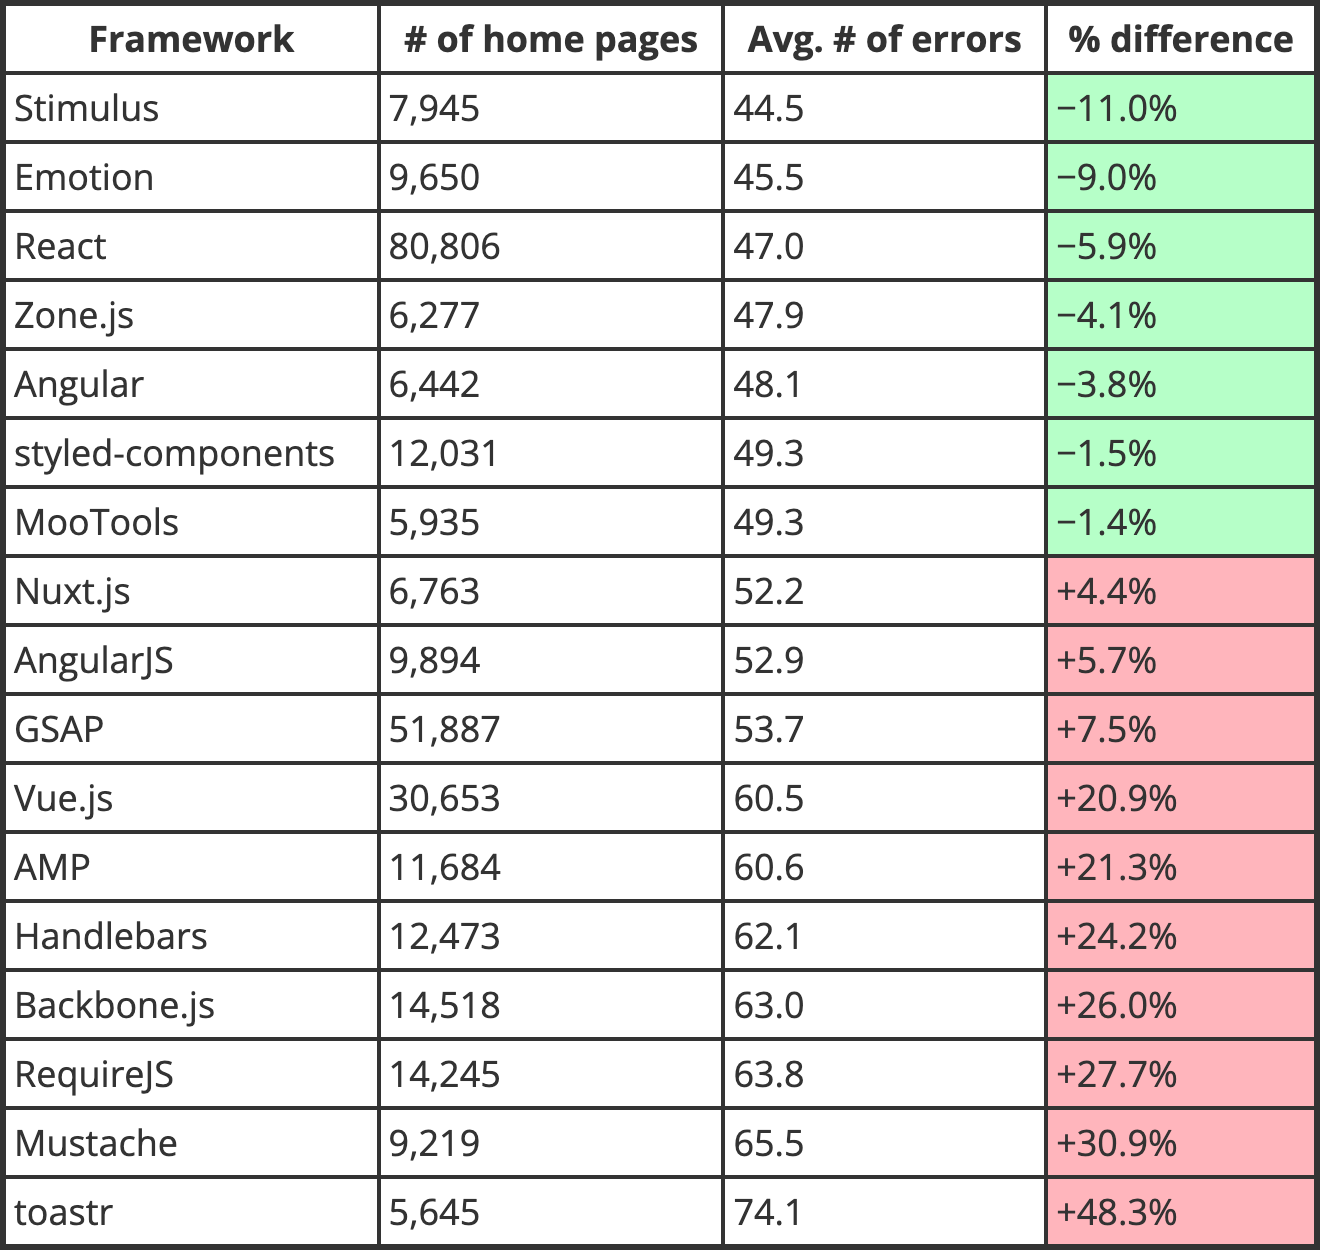 The WebAIM Million 2023 results for JavaScript frameworks. The accessibility support in Vue.js is 20.9% below the average